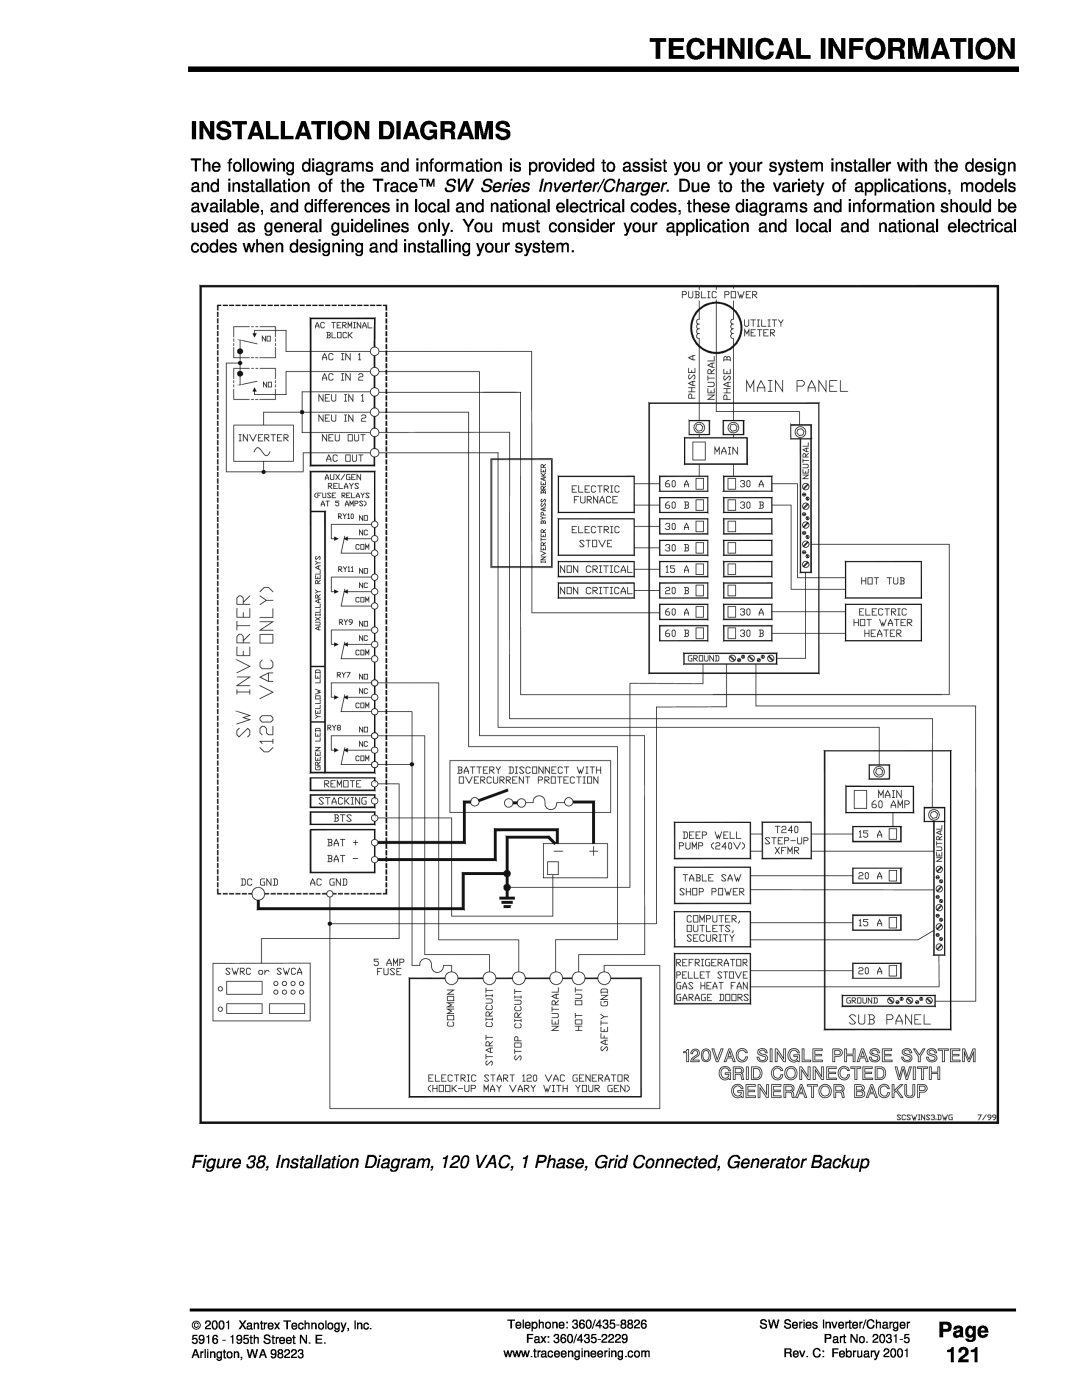 Xantrex Technology 120 VAC/60 owner manual Installation Diagrams, Page 121, Technical Information 